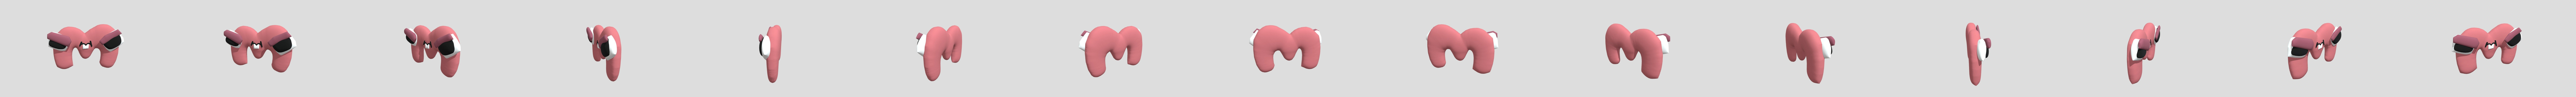 Baby M (Alphabet Lore) - Download Free 3D model by aniandronic